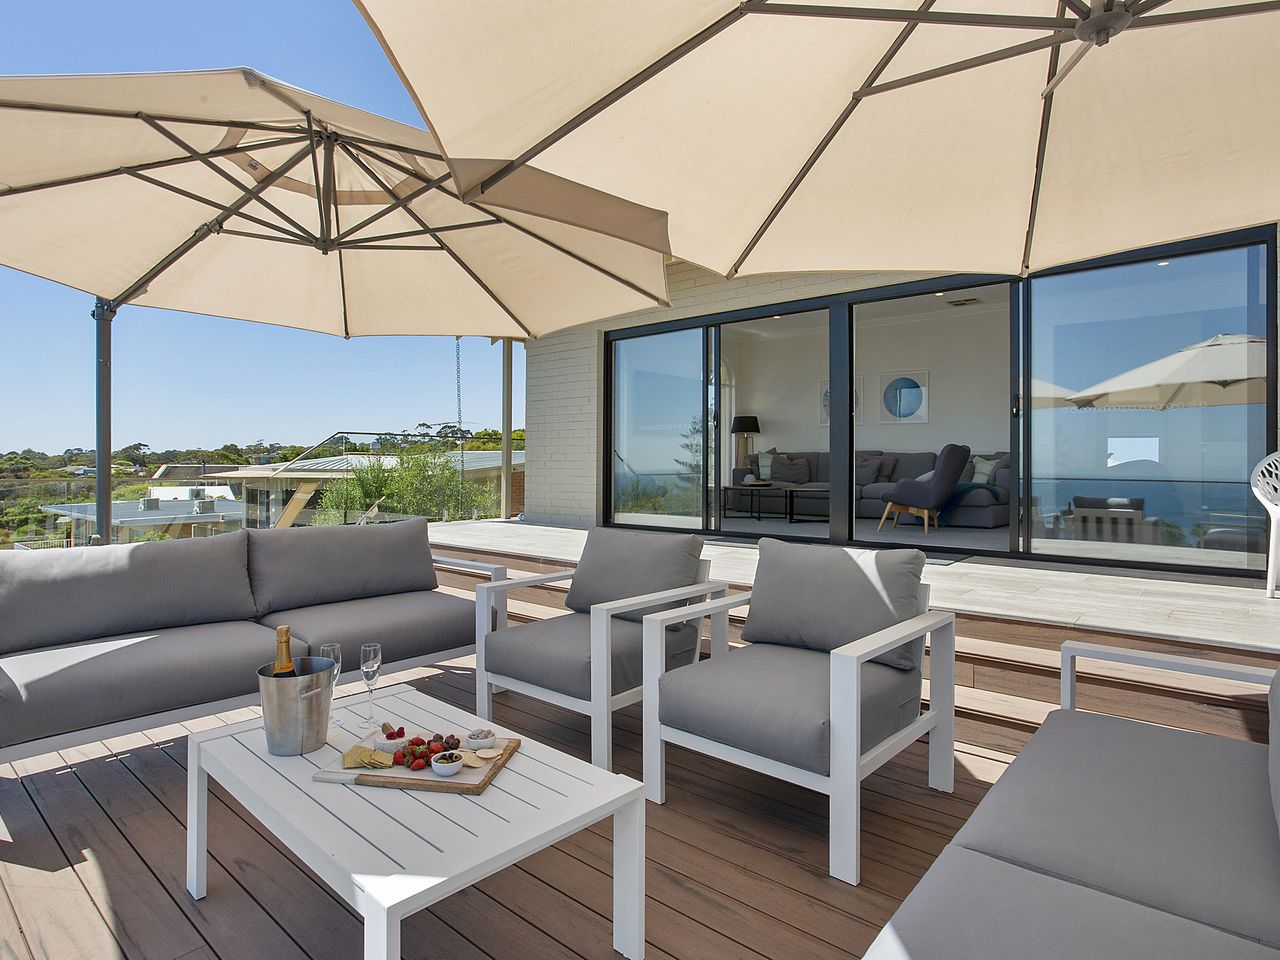 Property Image 2 - Panorama Bay - 4 Bedrooms, Large Entertaining Deck with Panoramic Bay Views